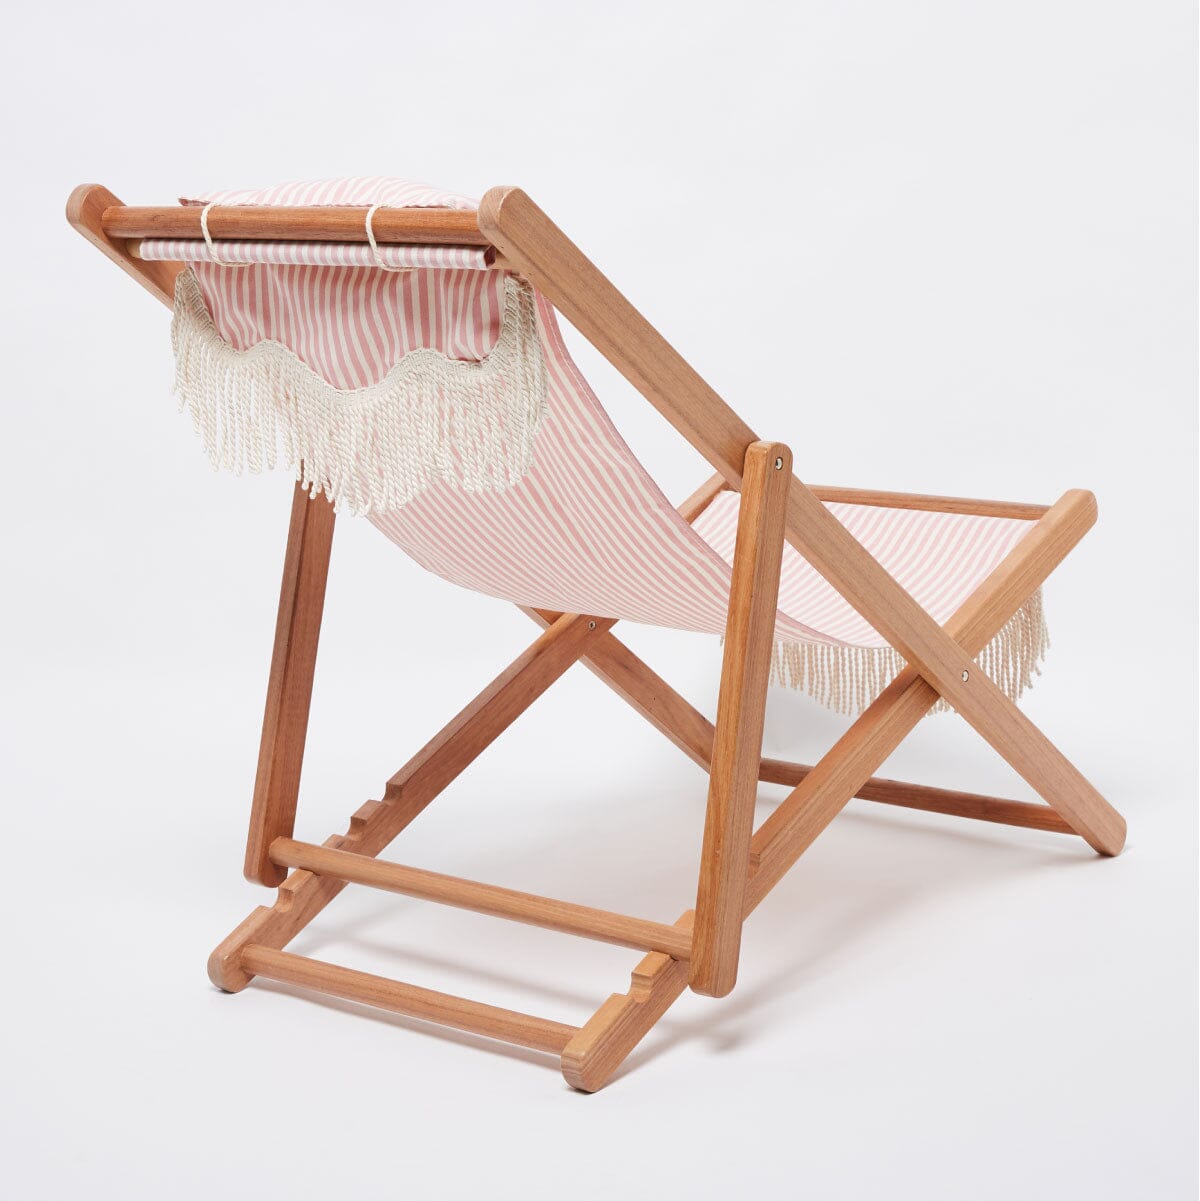 The Sling Chair - Lauren's Pink Stripe Sling Chair Business & Pleasure Co 